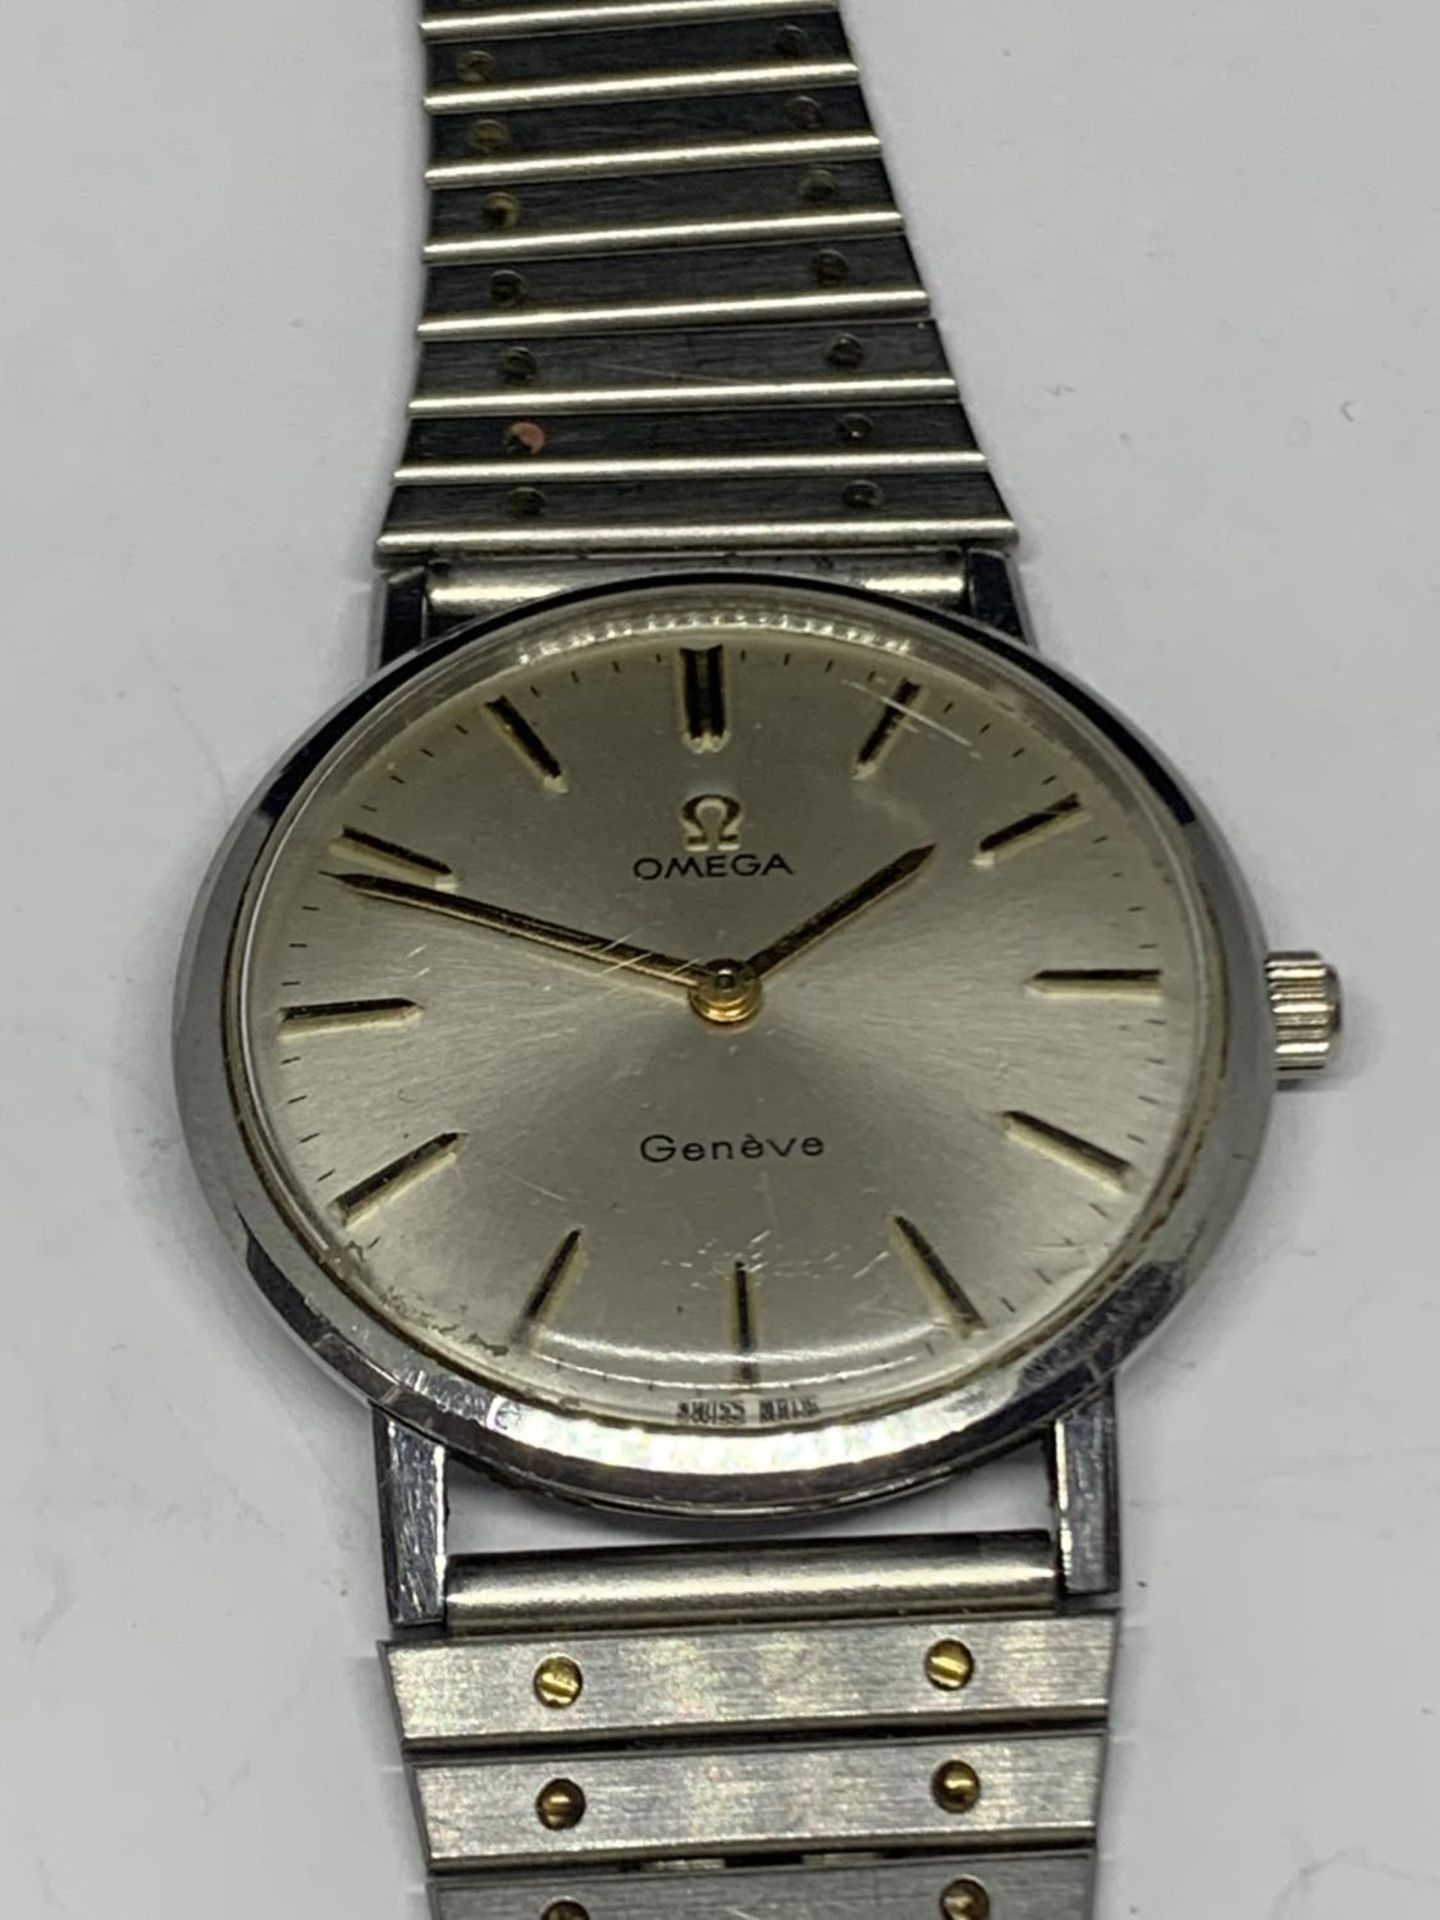 AN OMEGA GENEVE GENTS WRIST WATCH - Image 2 of 3